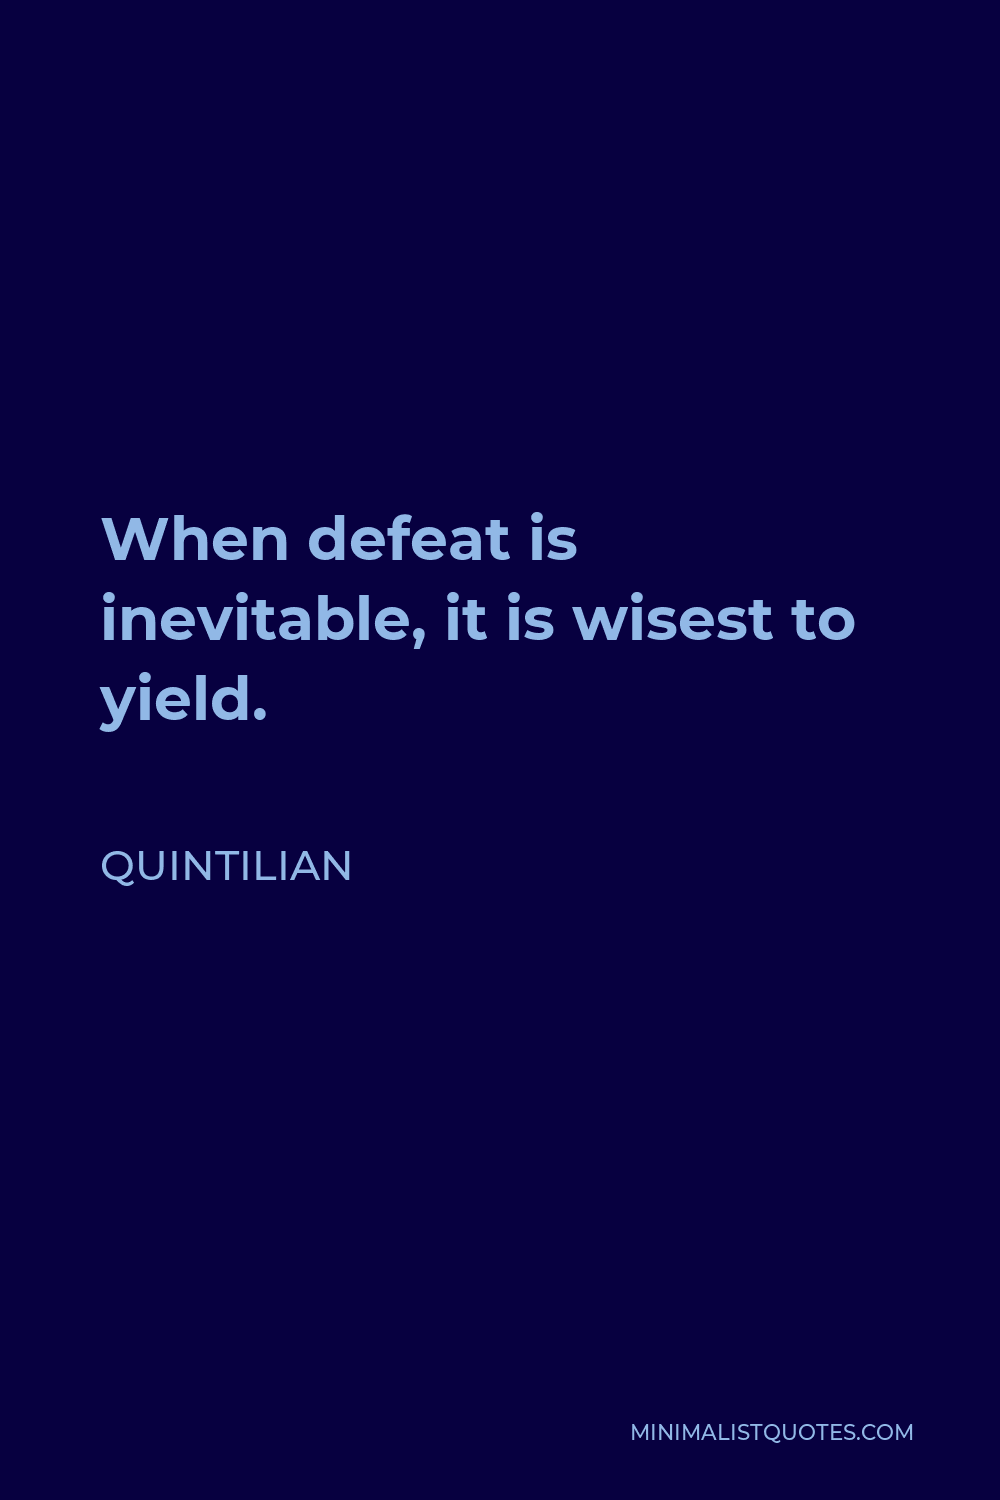 Quintilian Quote - When defeat is inevitable, it is wisest to yield.